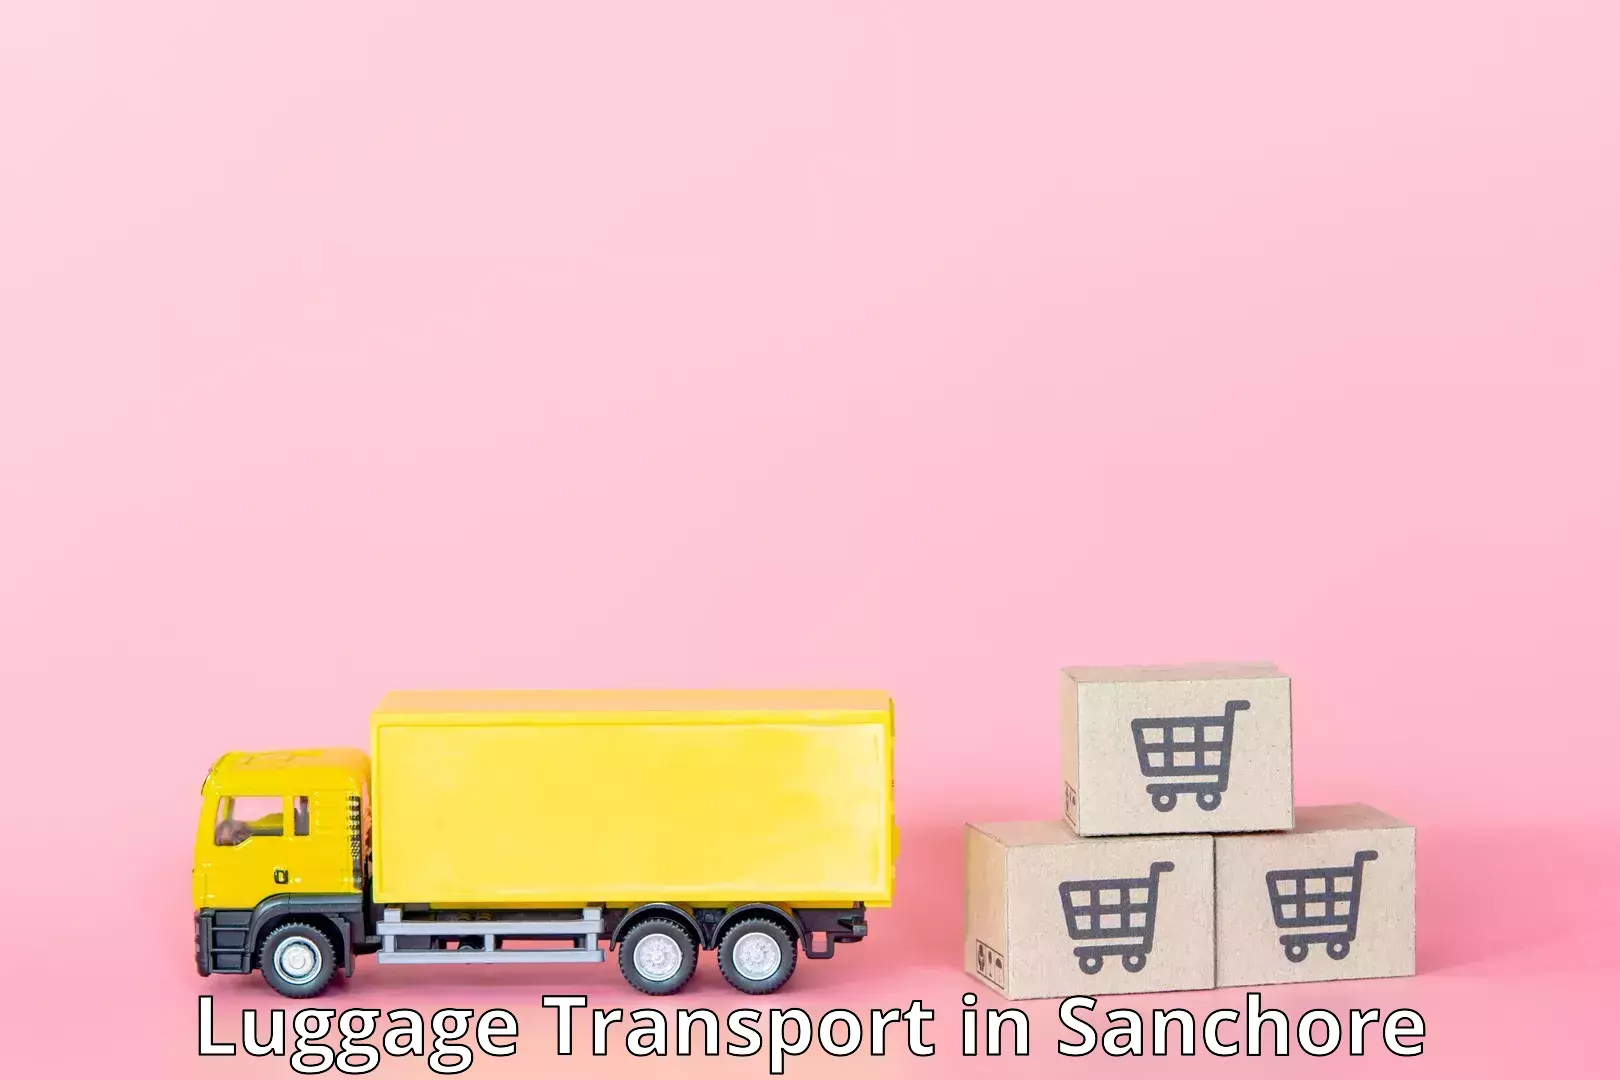 Hassle-free luggage shipping in Sanchore